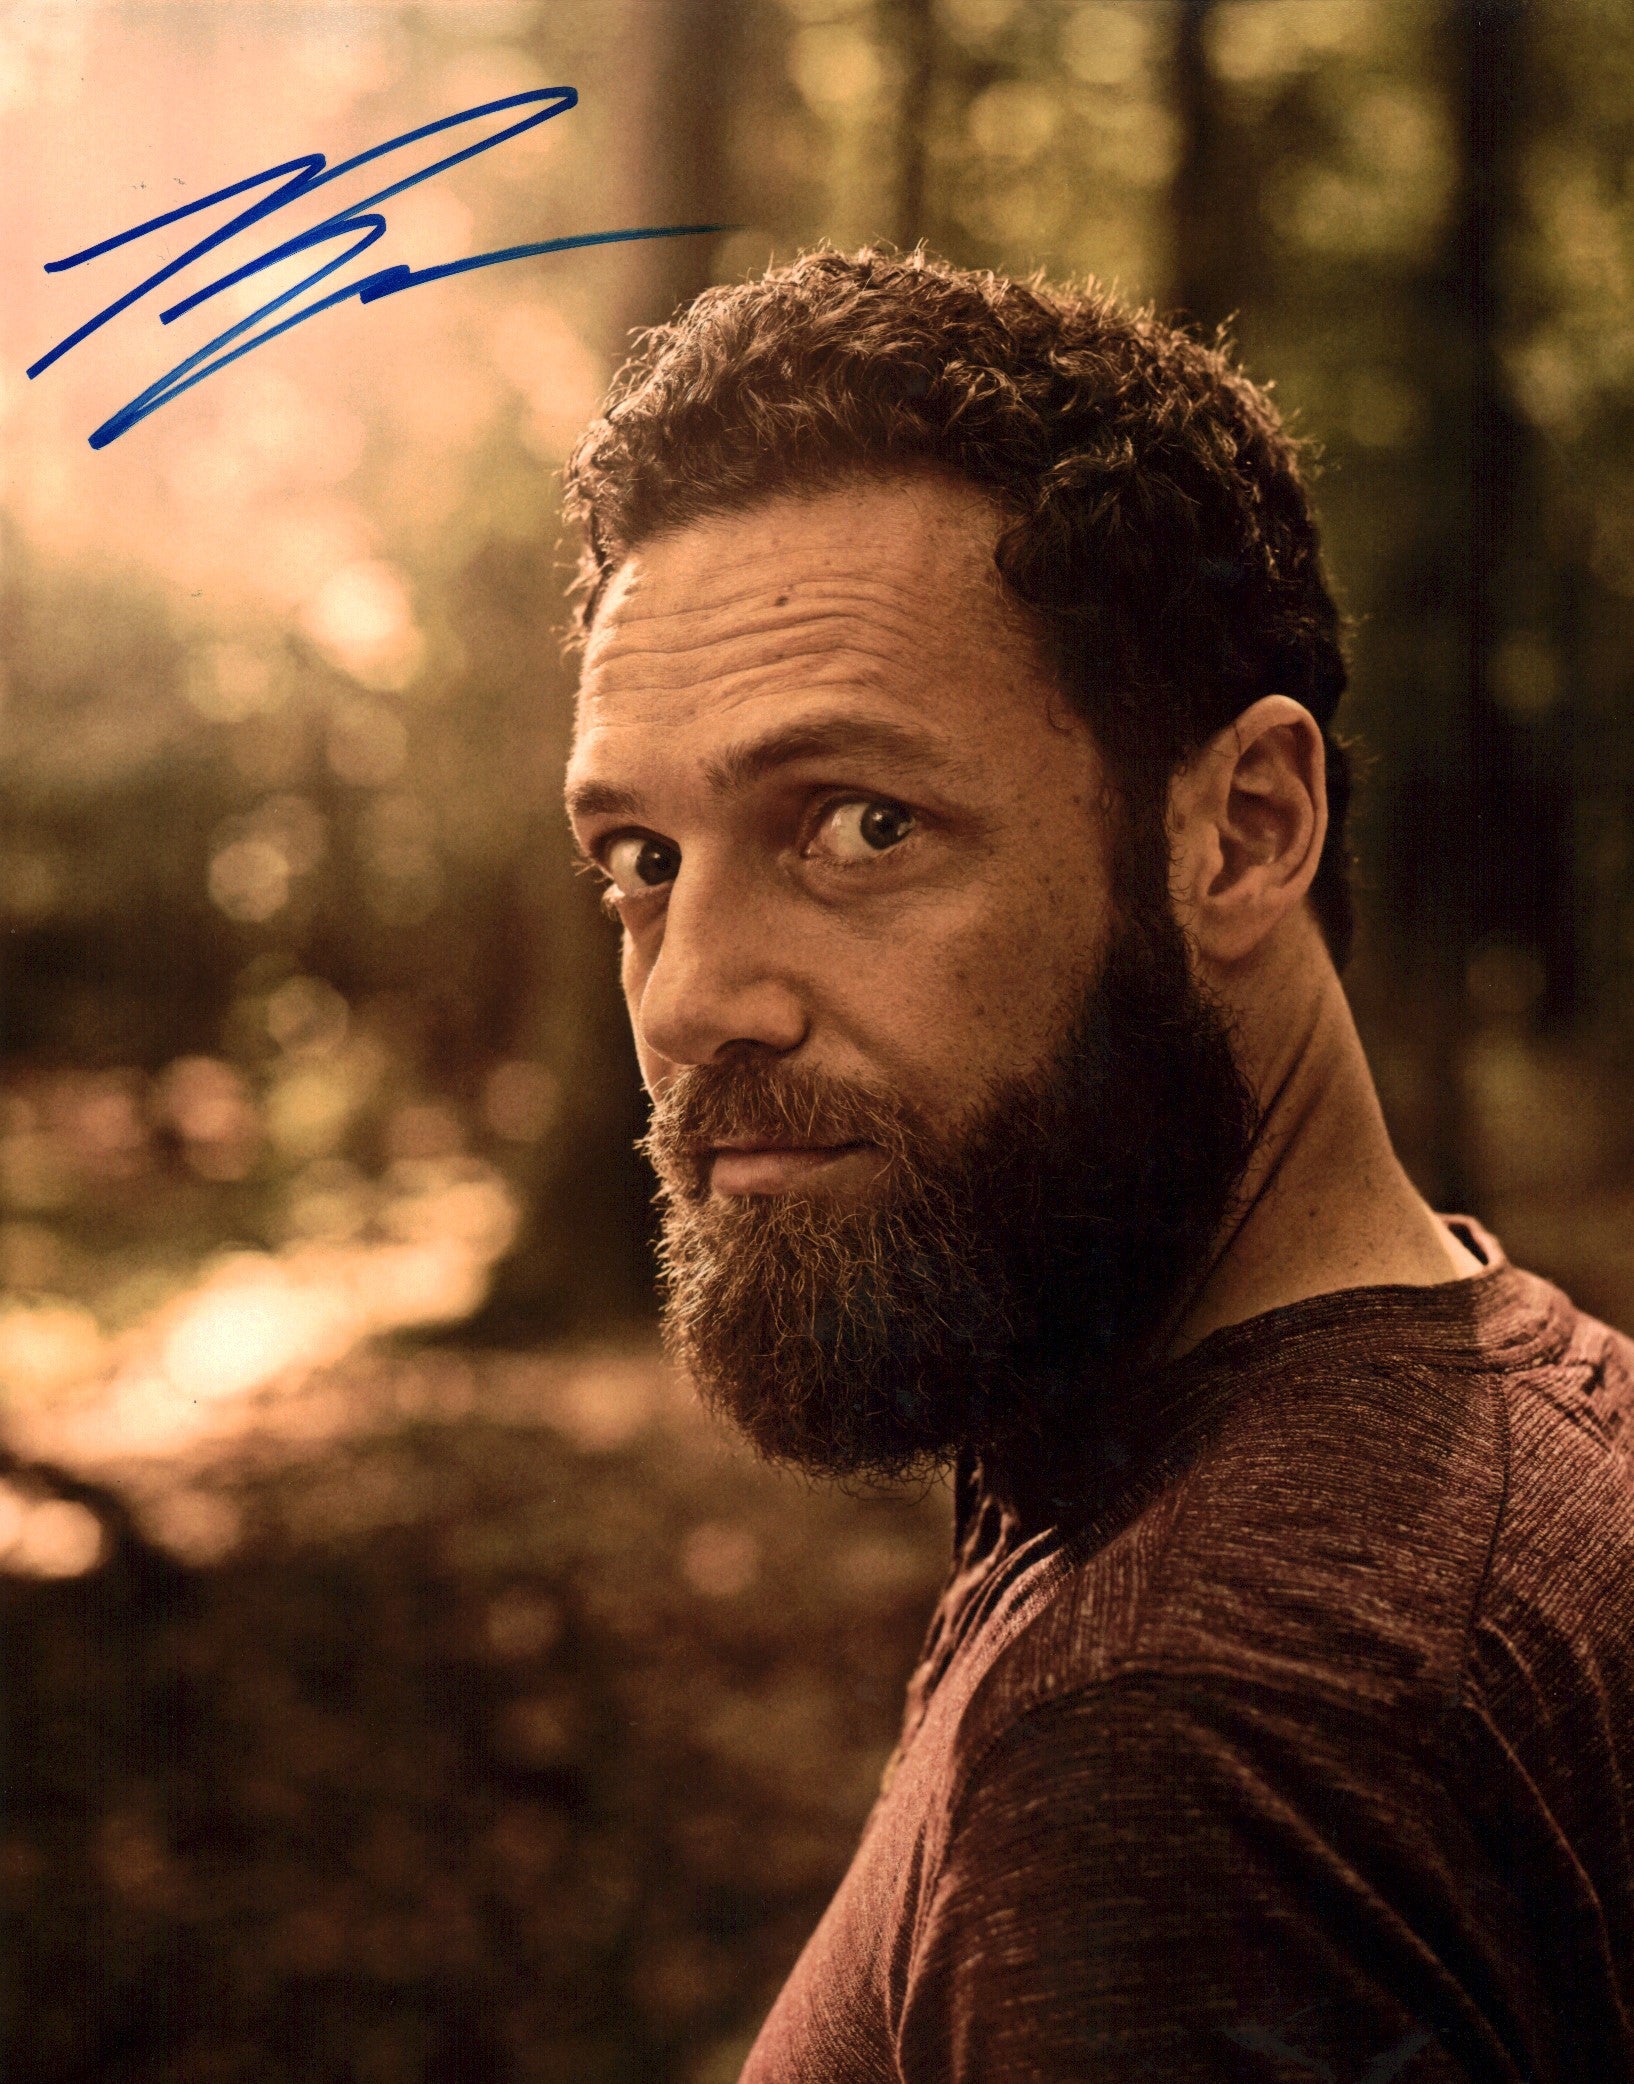 Ross Marquand The Walking Dead 11x14 Signed Photo JSA COA Certified Autograph